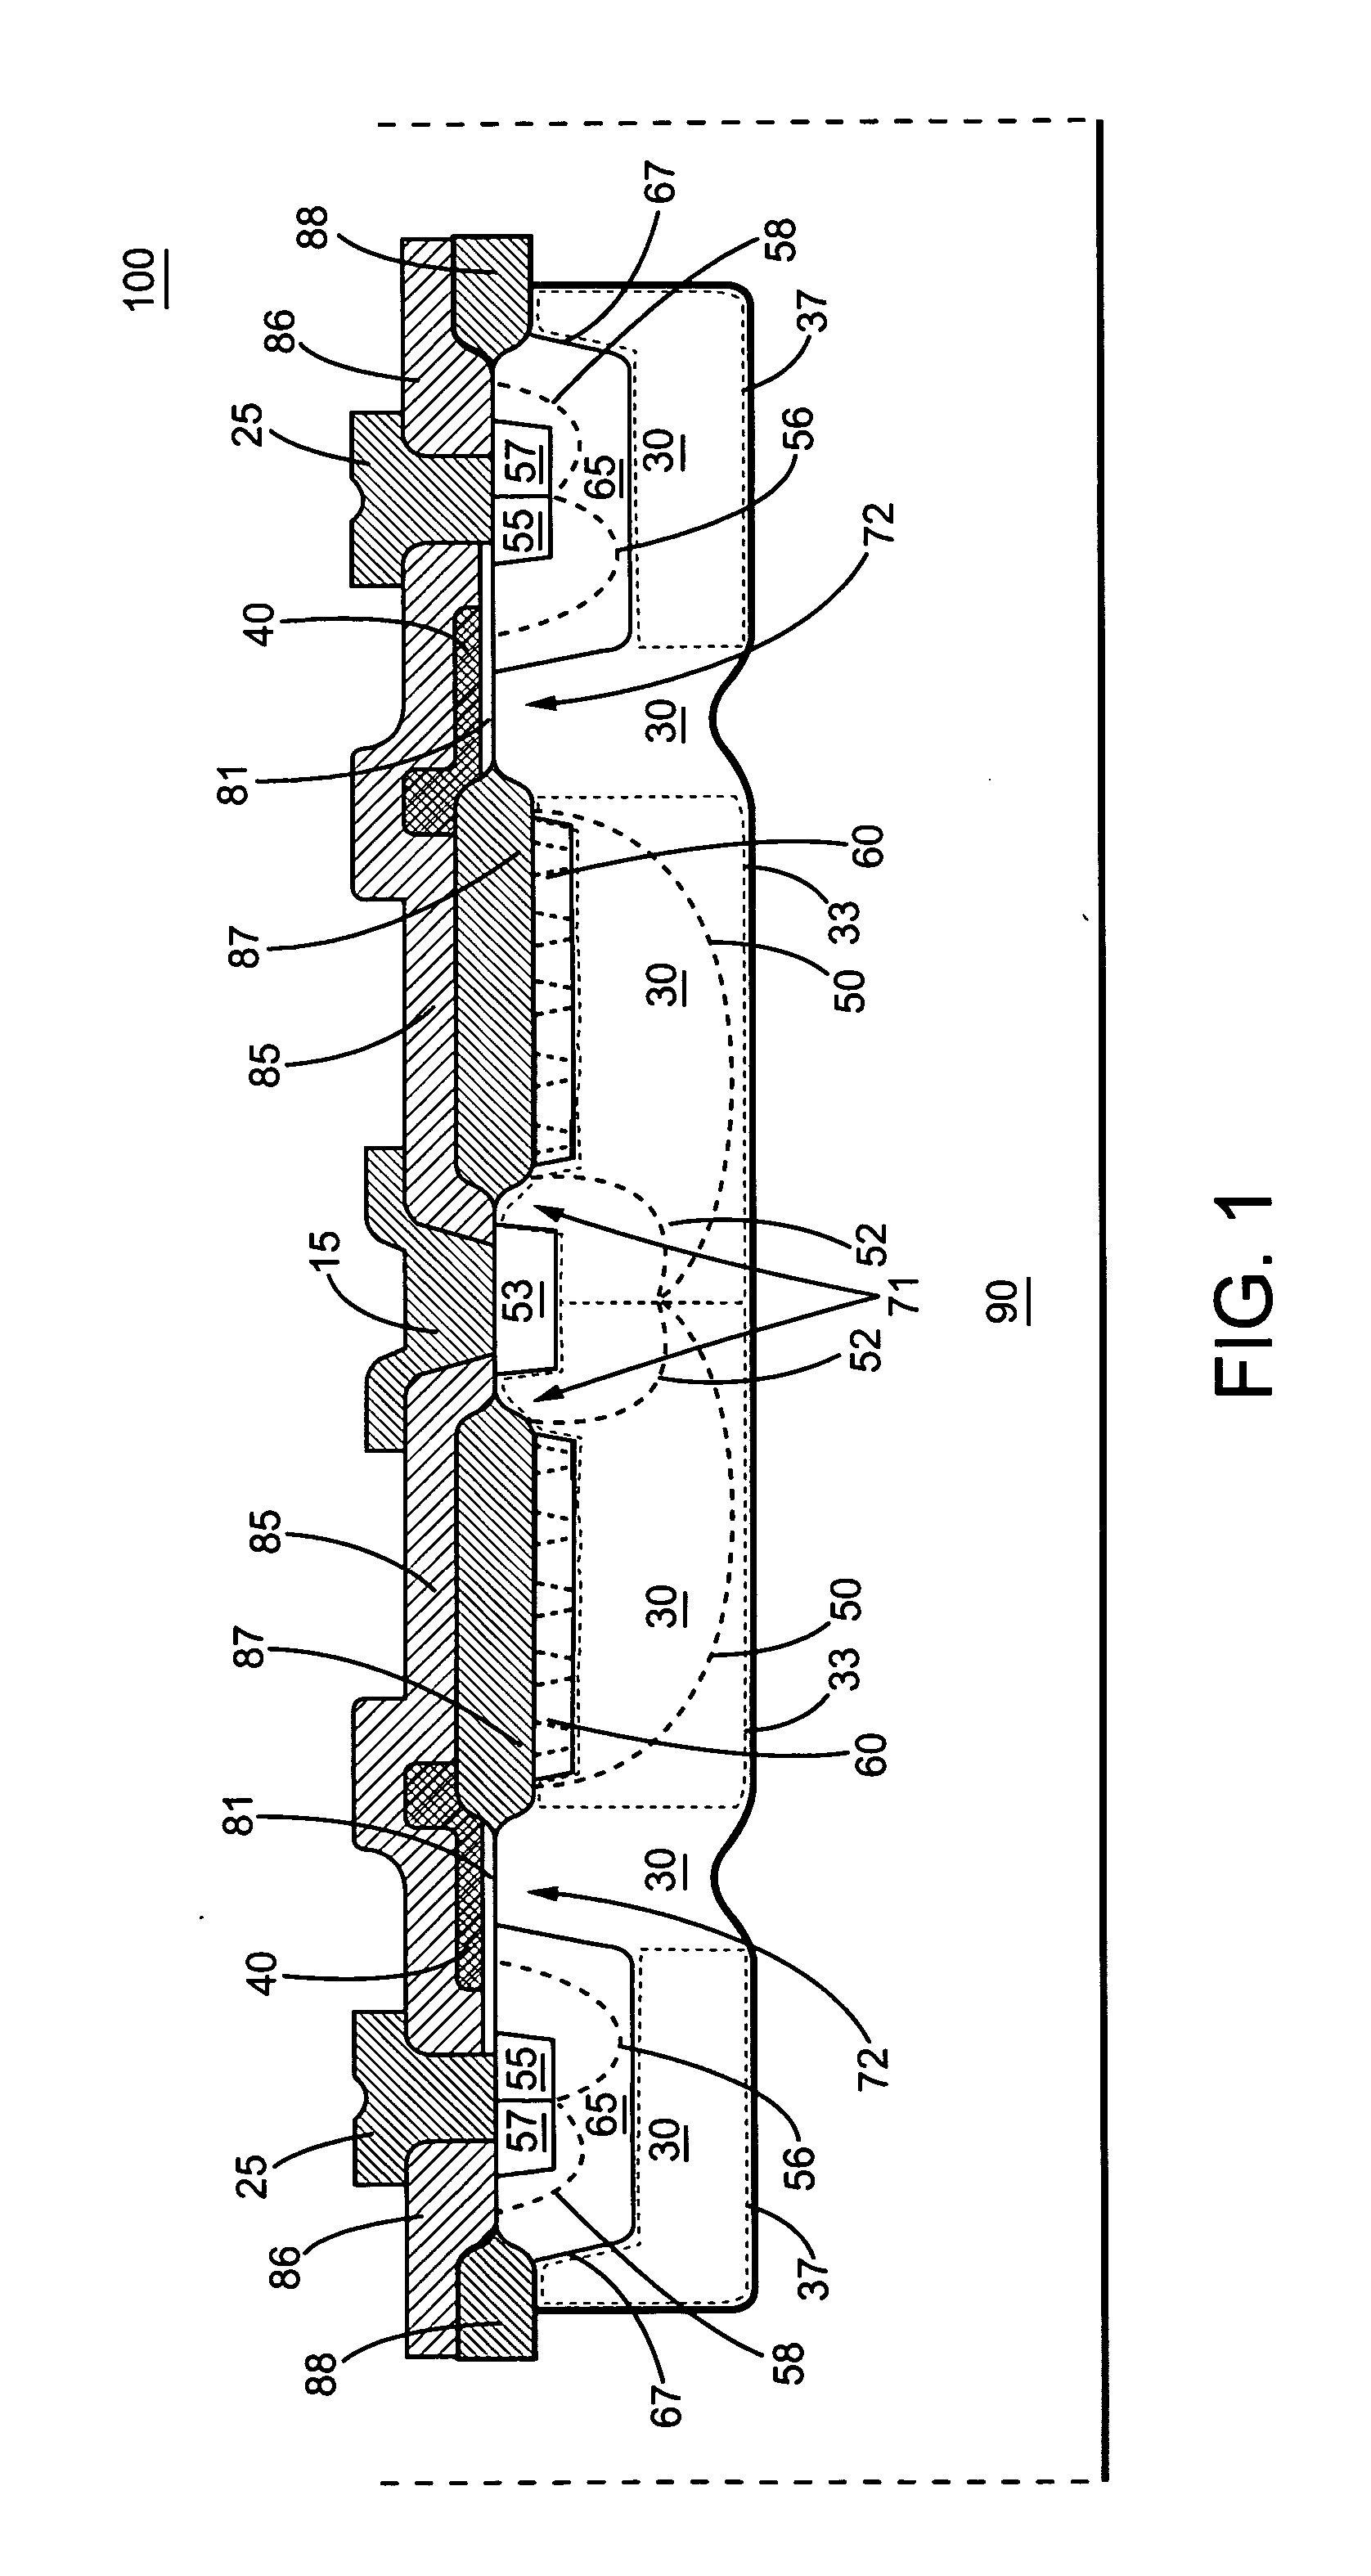 High voltage and low on-resistance LDMOS transistor having radiation structure and isolation effect